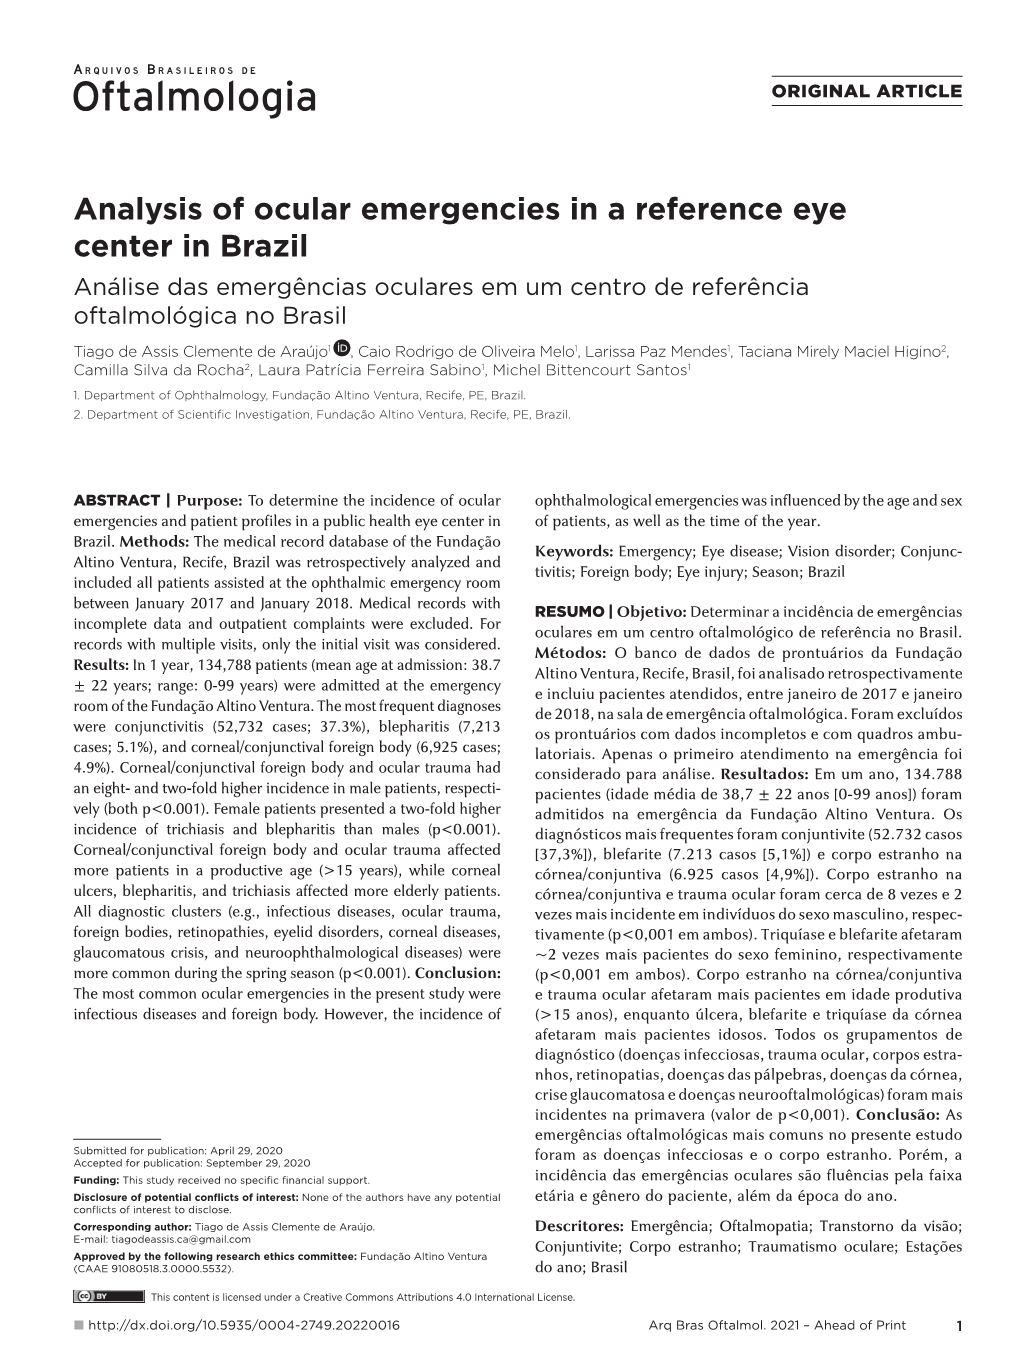 Analysis of Ocular Emergencies in a Reference Eye Center in Brazil